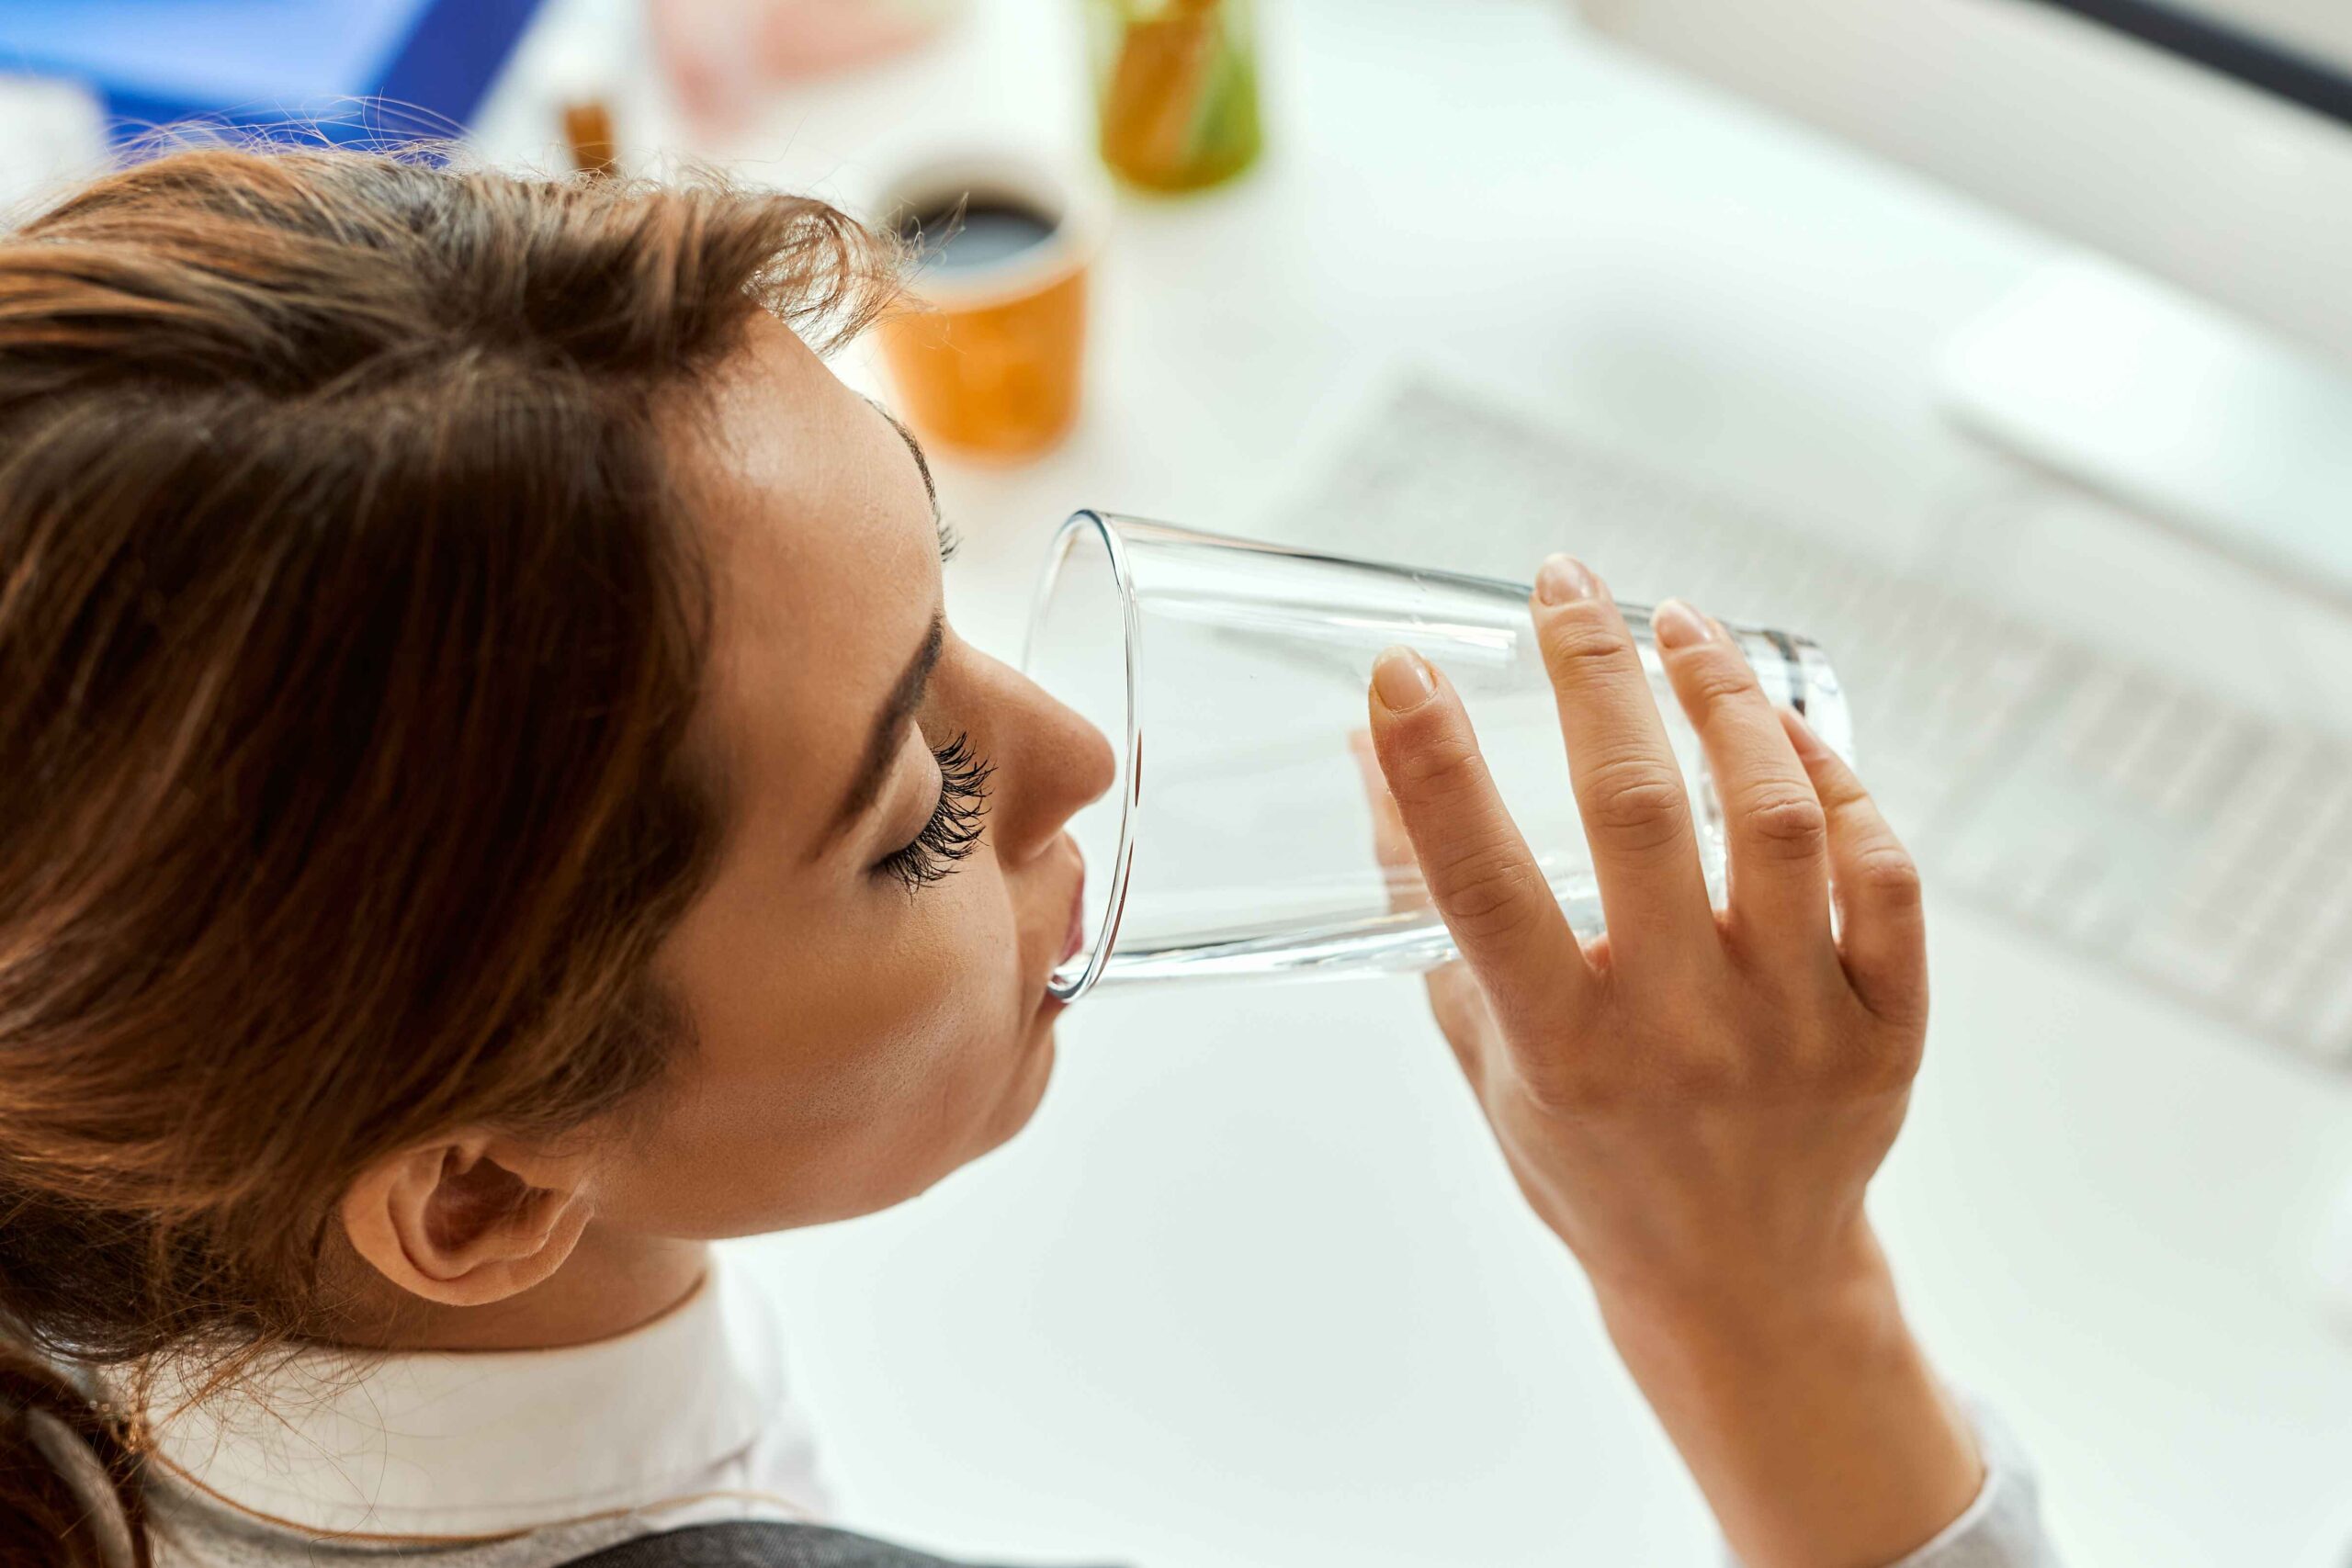 WHY YOU SHOULD NOT DRINK CHILLED WATER, AYURVEDIC DOCTOR EXPLAINS